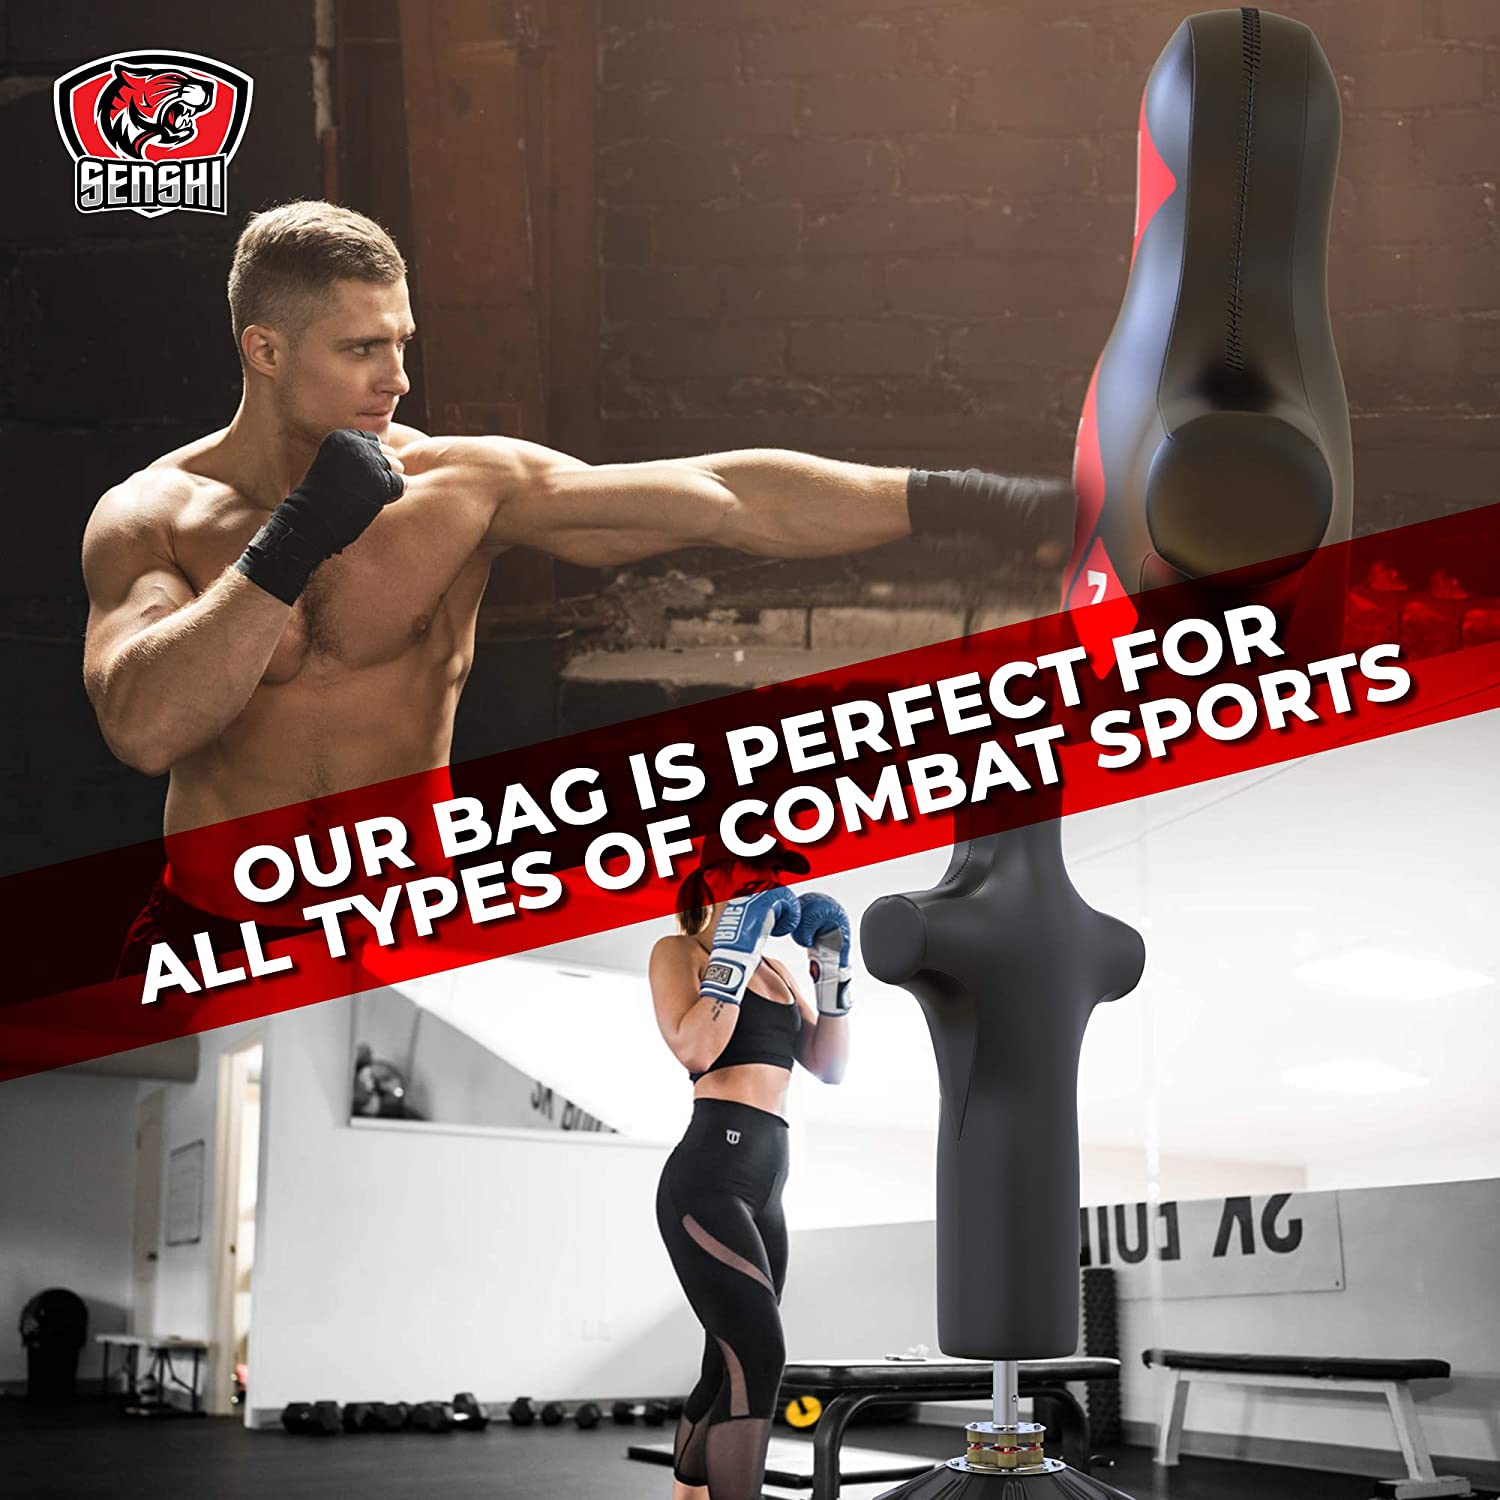 6ft Free Standing Torso Punch Bag With Low Kick Guard - 